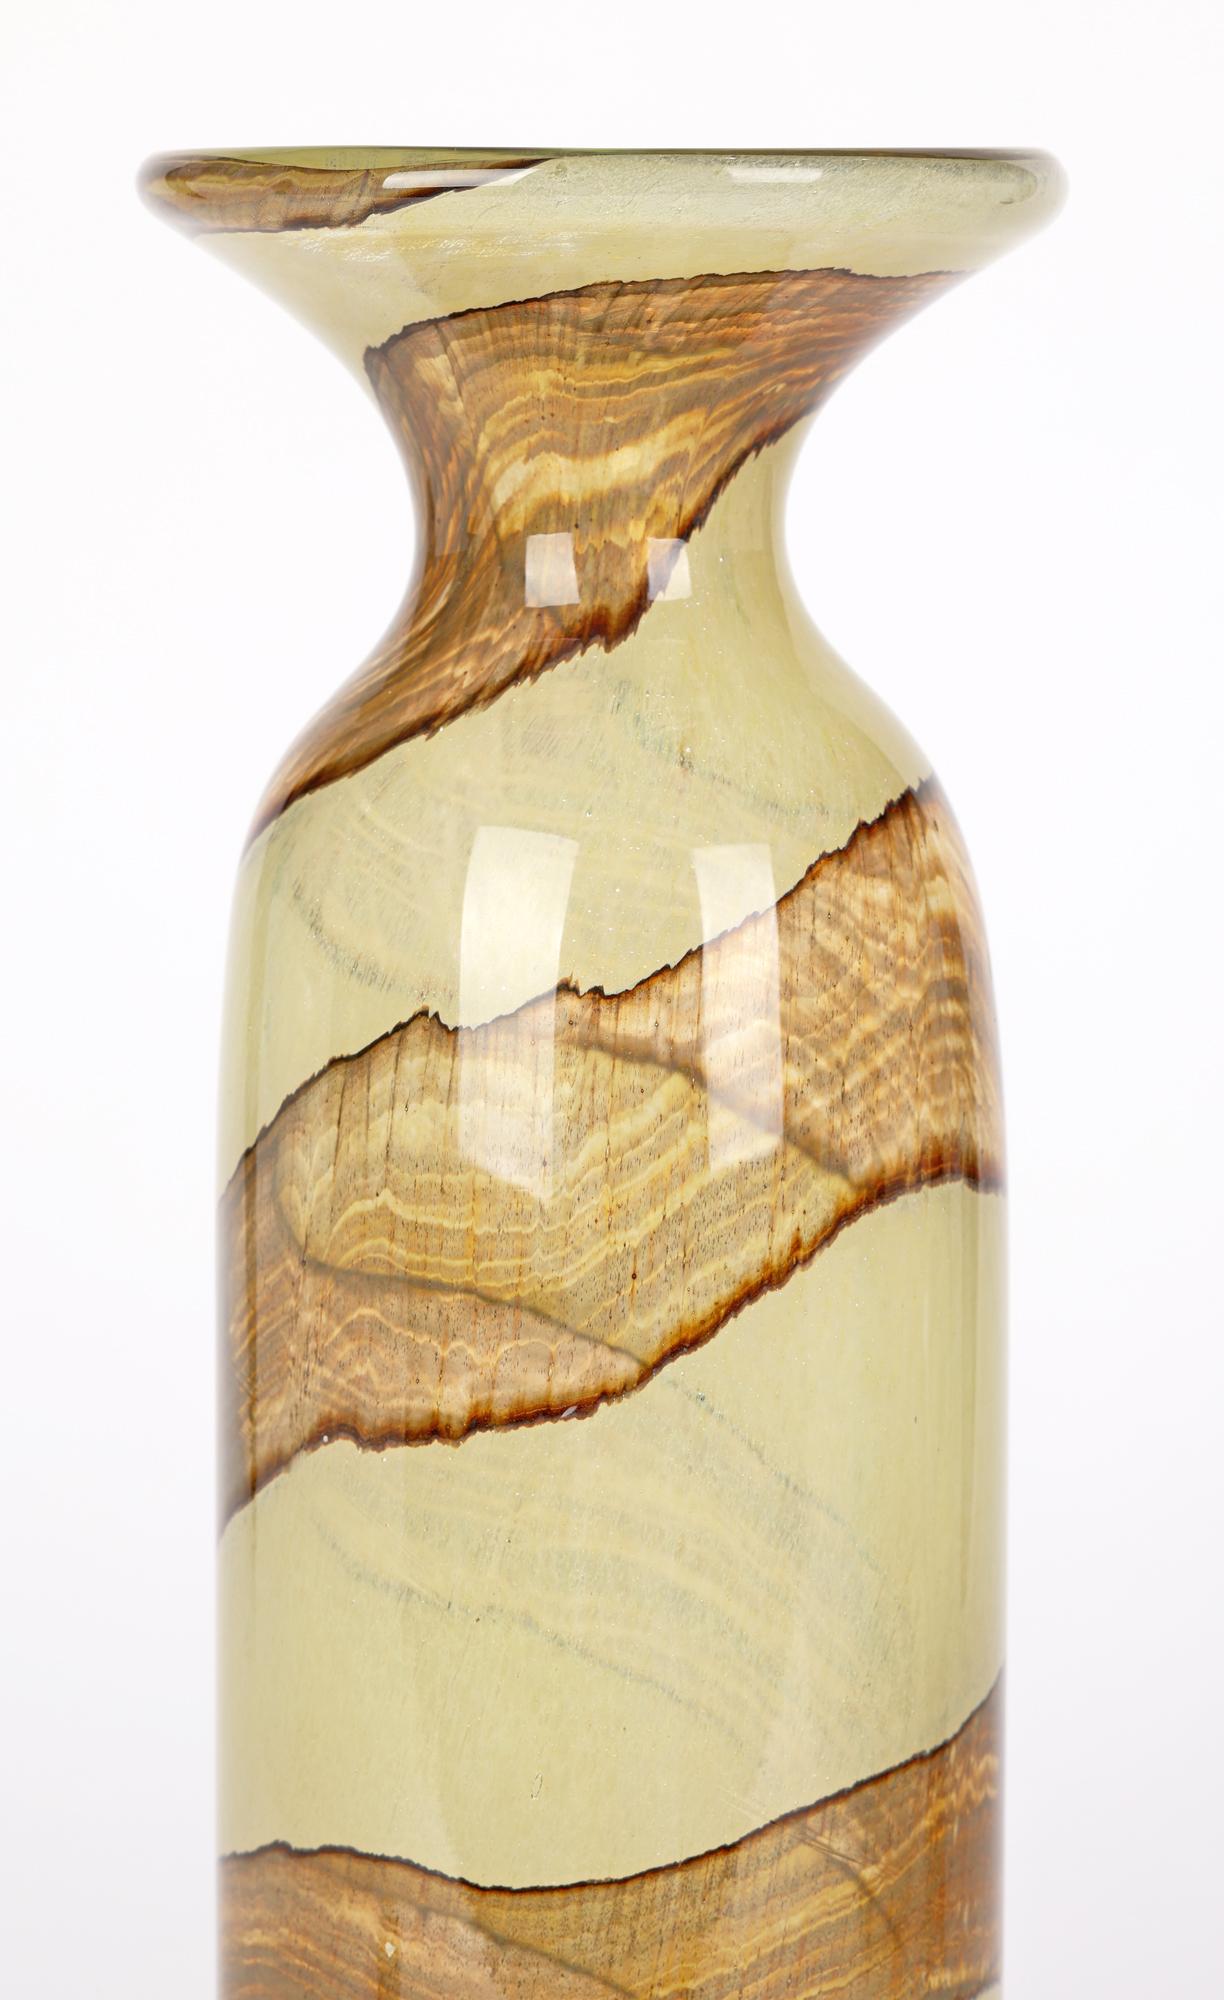 A tall and stylish Maltese art glass vase with a brown swirl design made at Mdina and designed by Michael Harris in the early 1970’s. The hand blown glass vase is of tall slender cylindrical shape with a narrow pinched neck and wide trumpet shaped